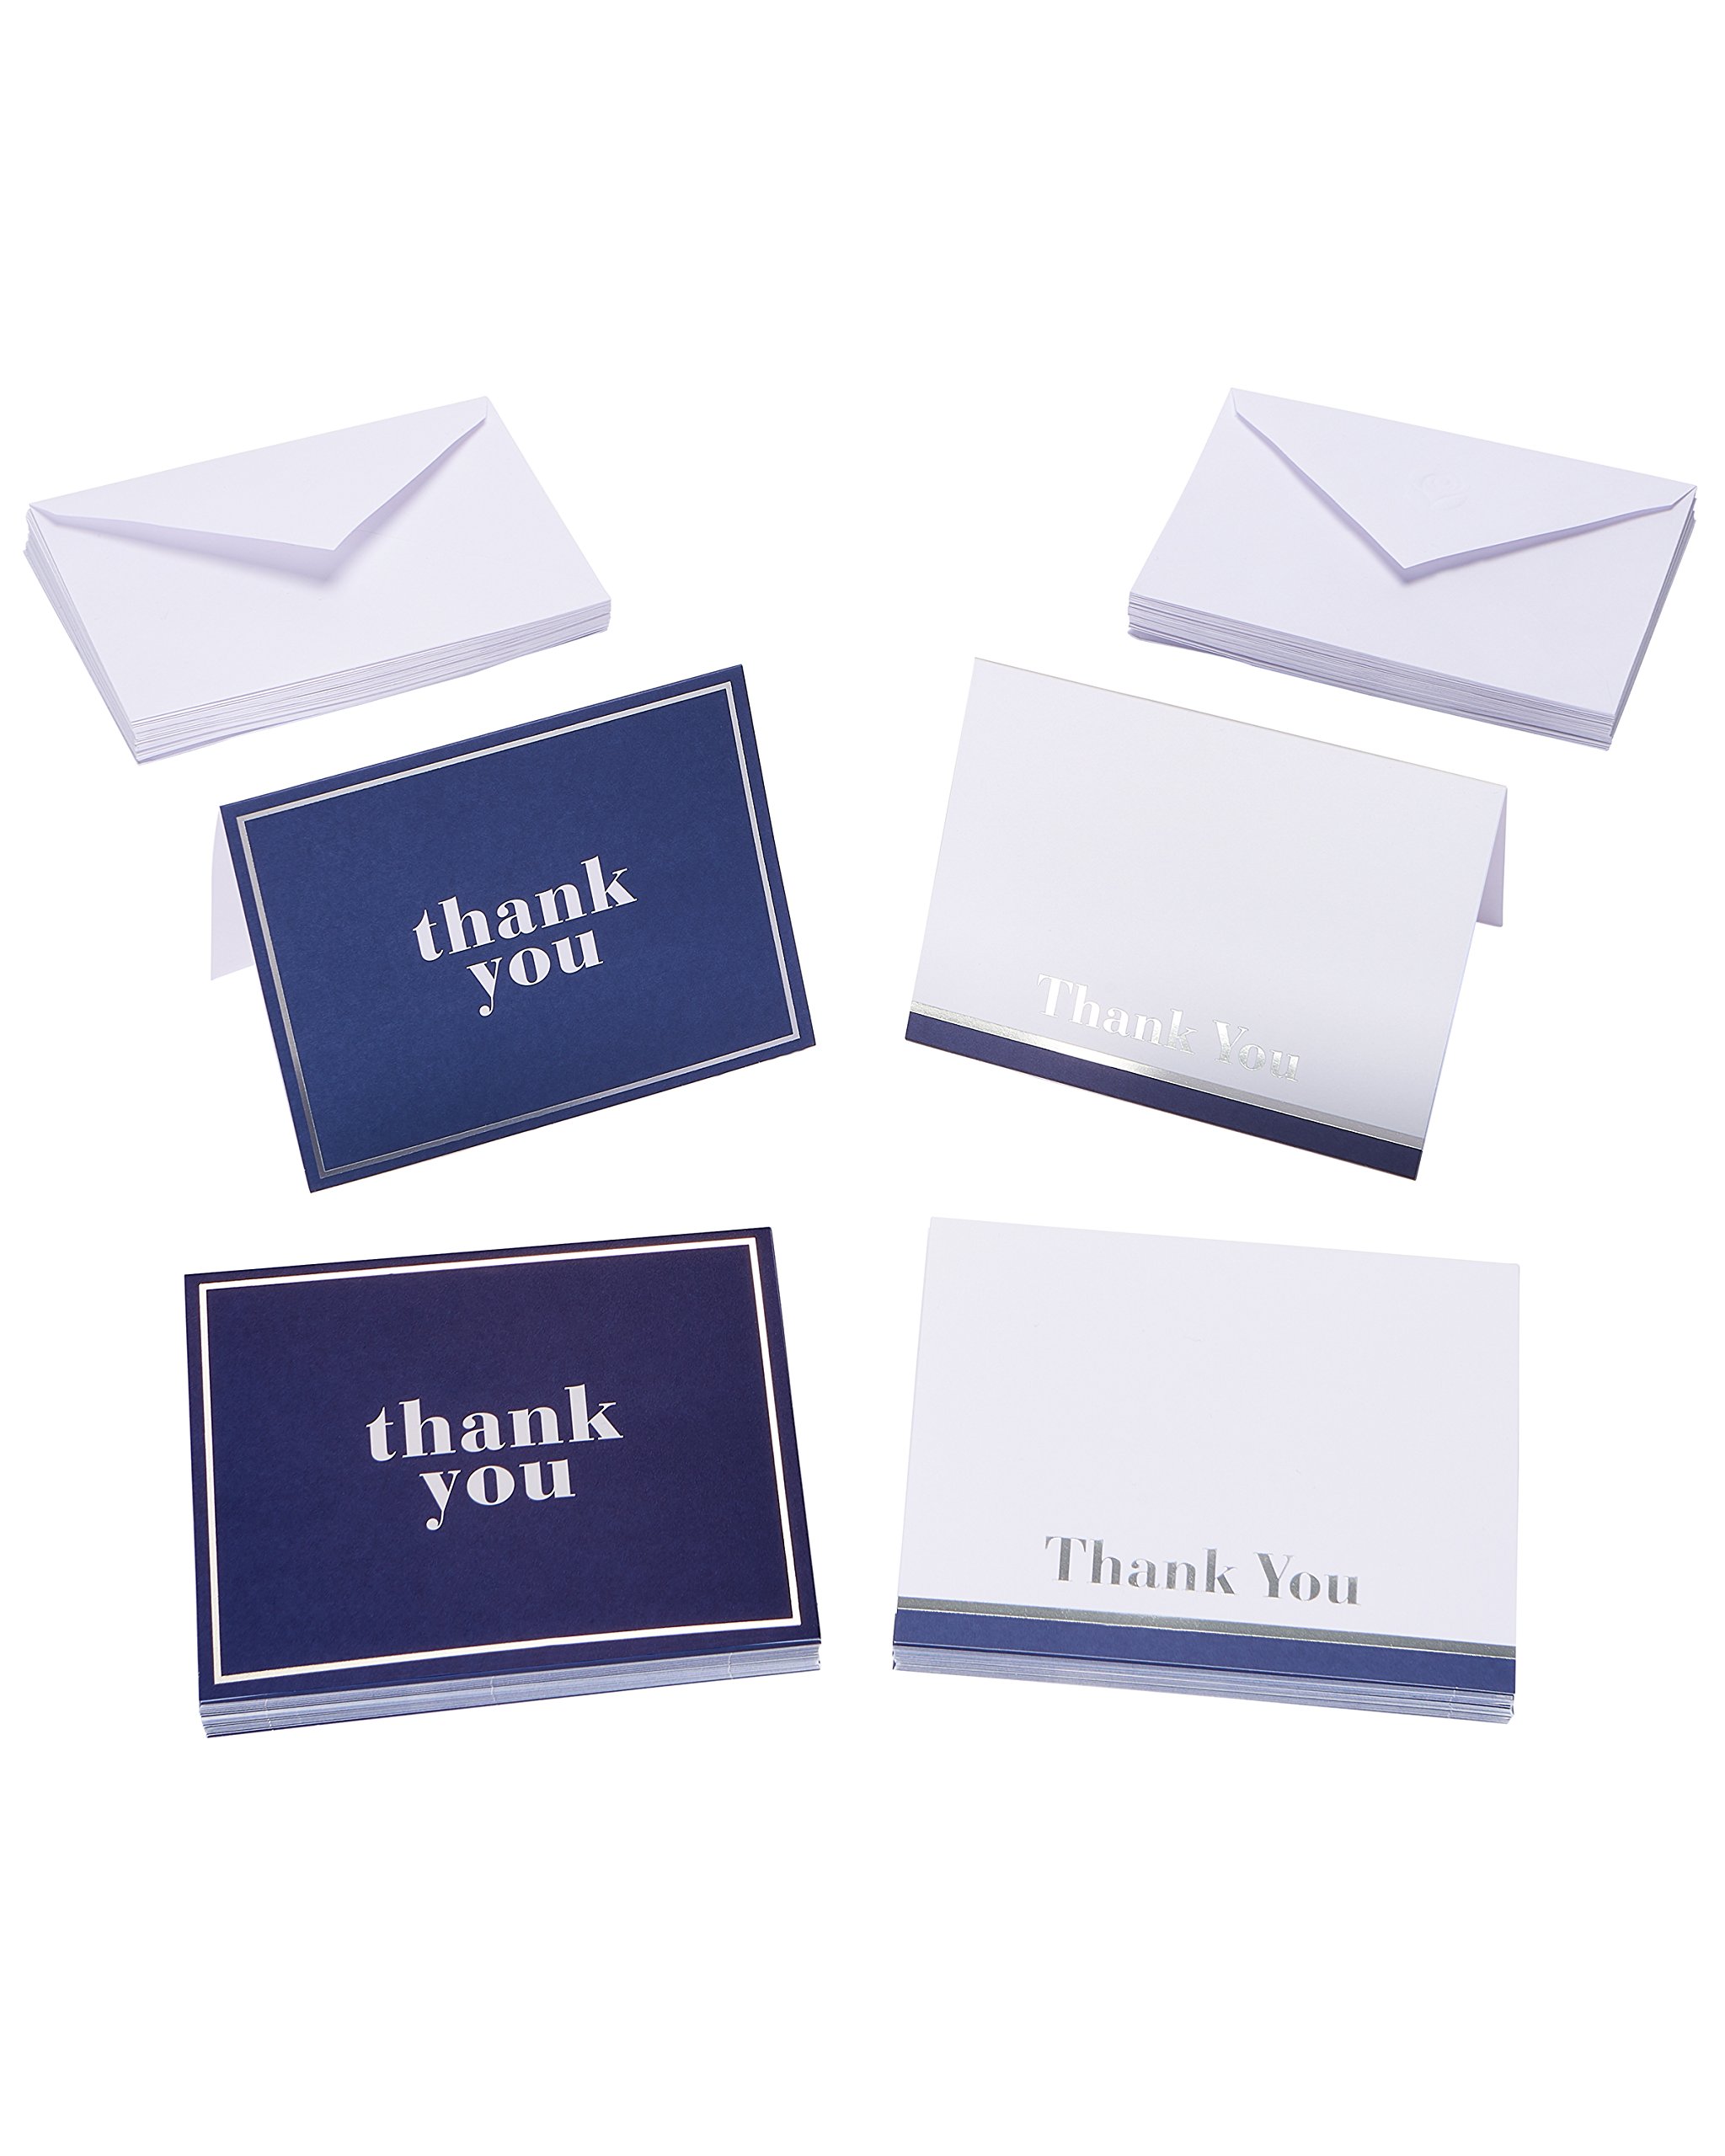 American Greetings Thank You Cards with Envelopes, Blue and White (50-Count)